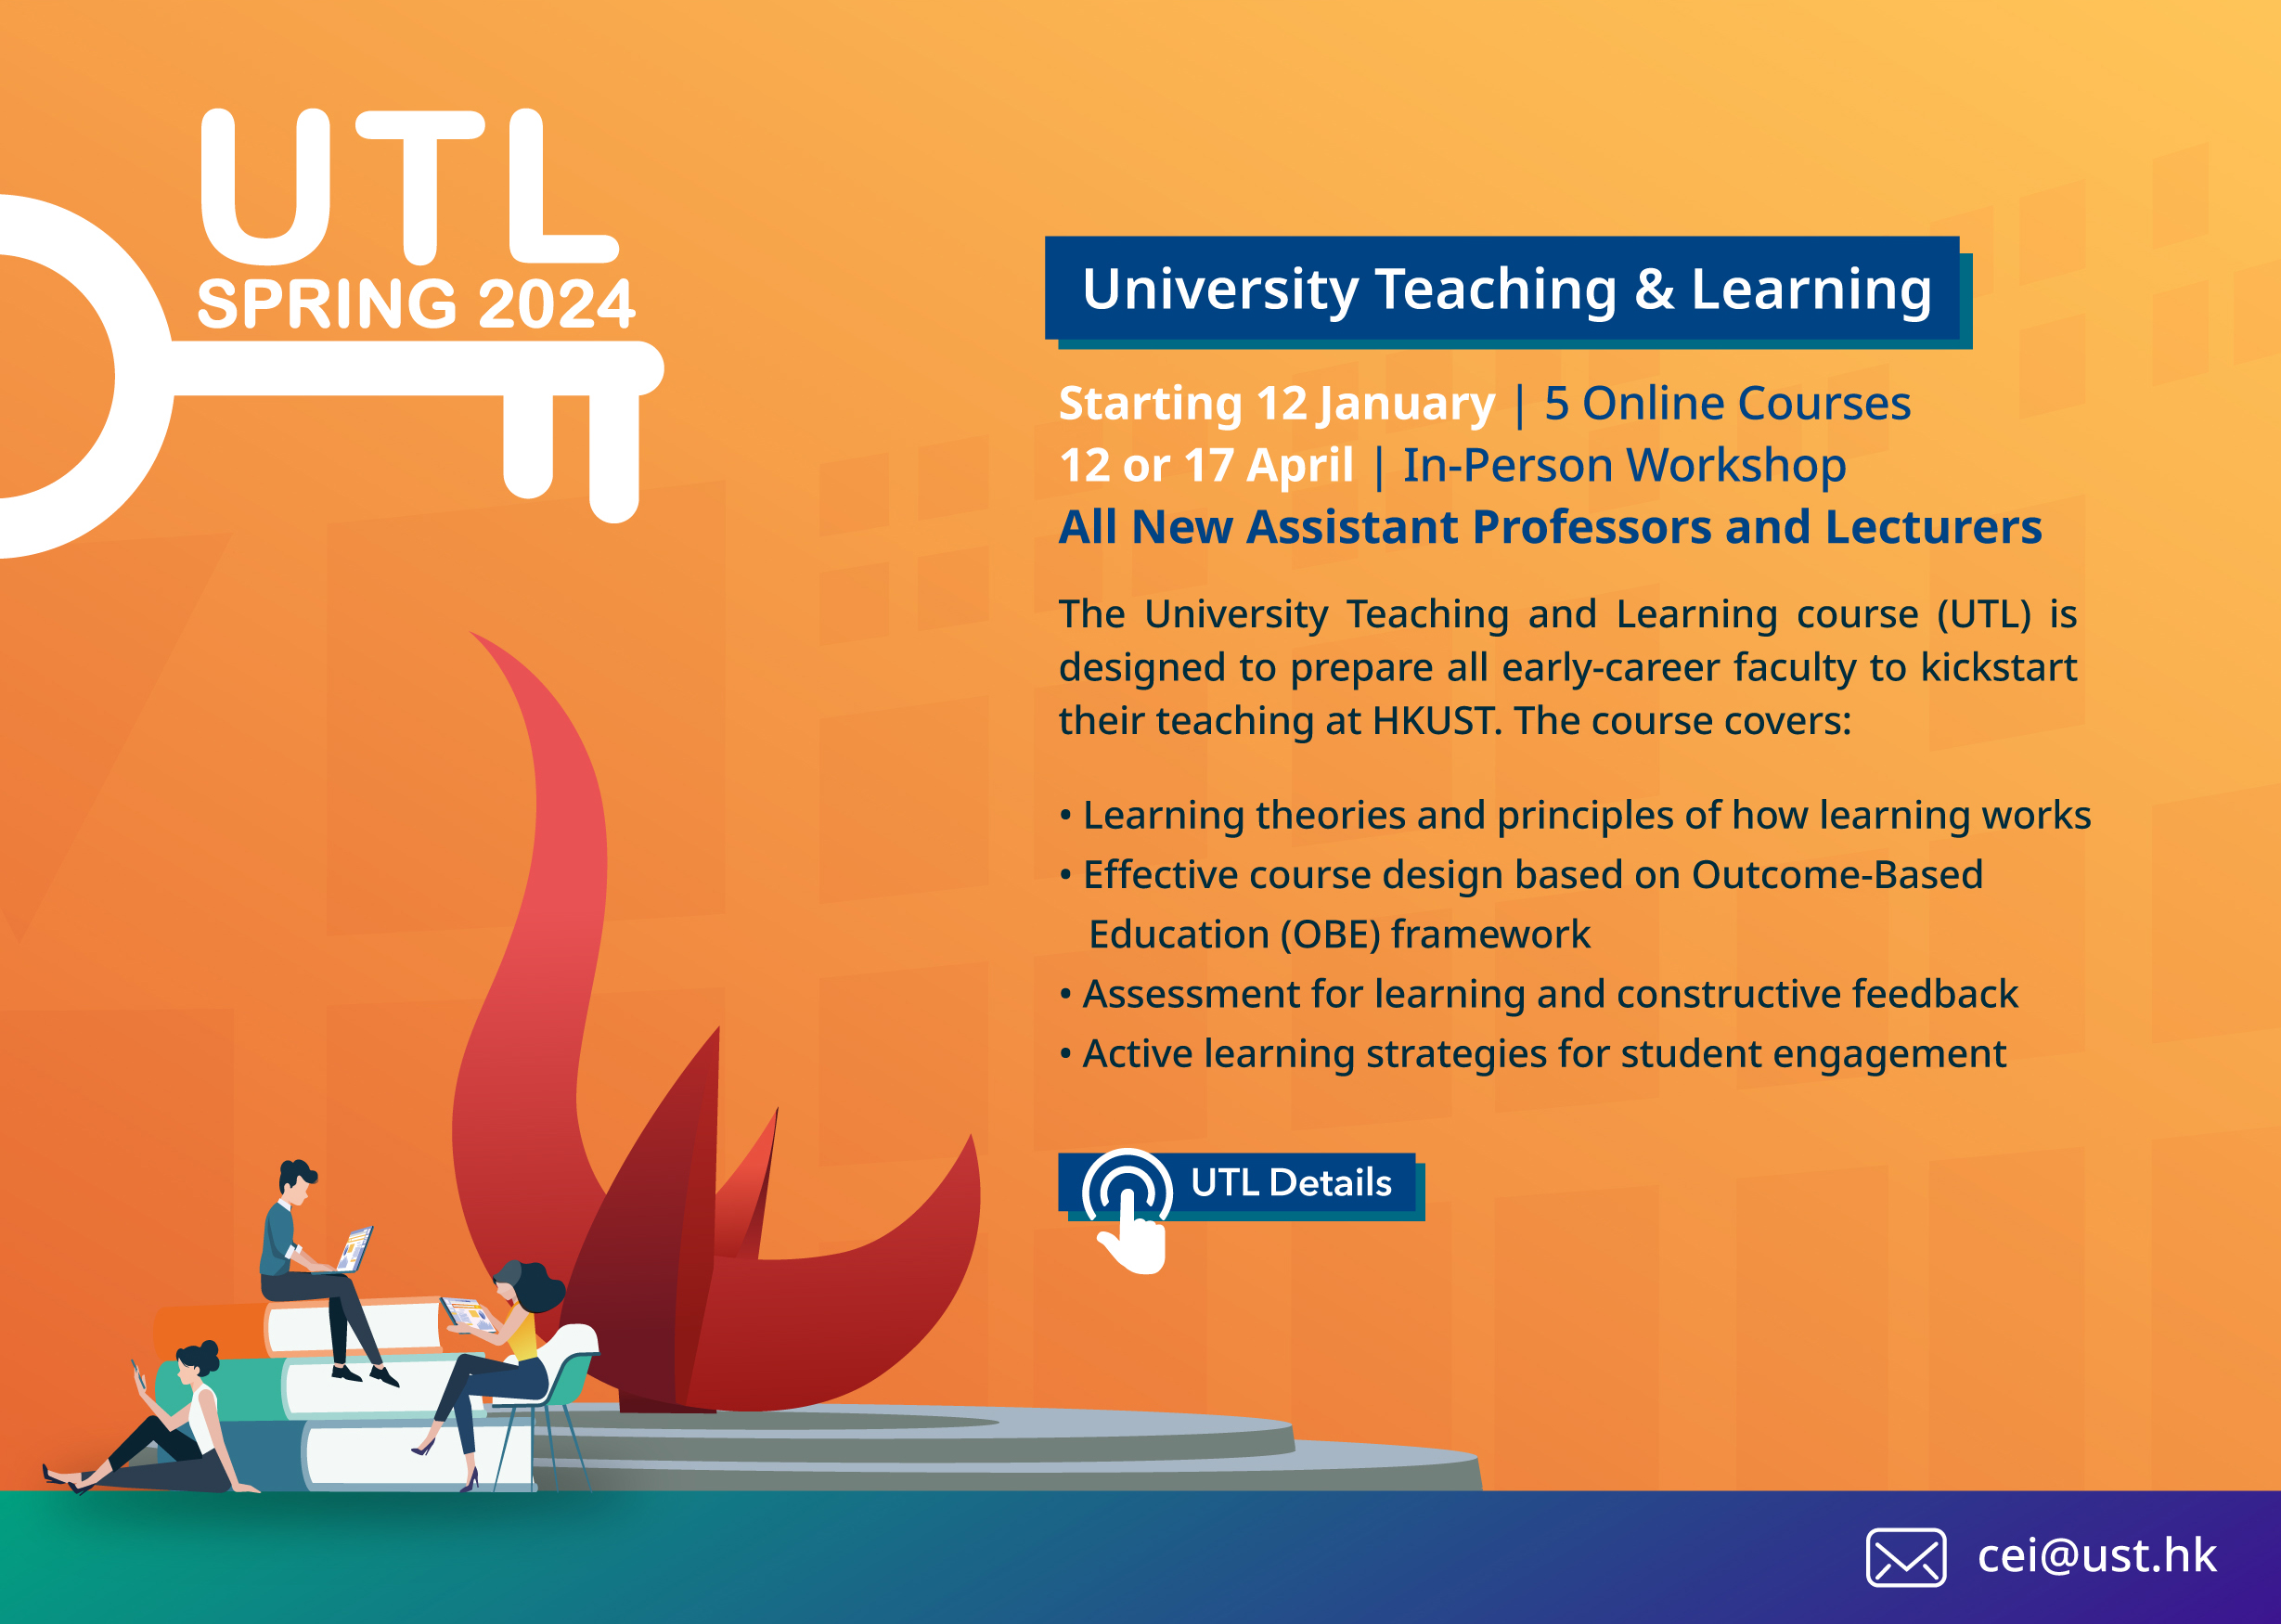 New Faculty Orientation and University Teaching & Learning course